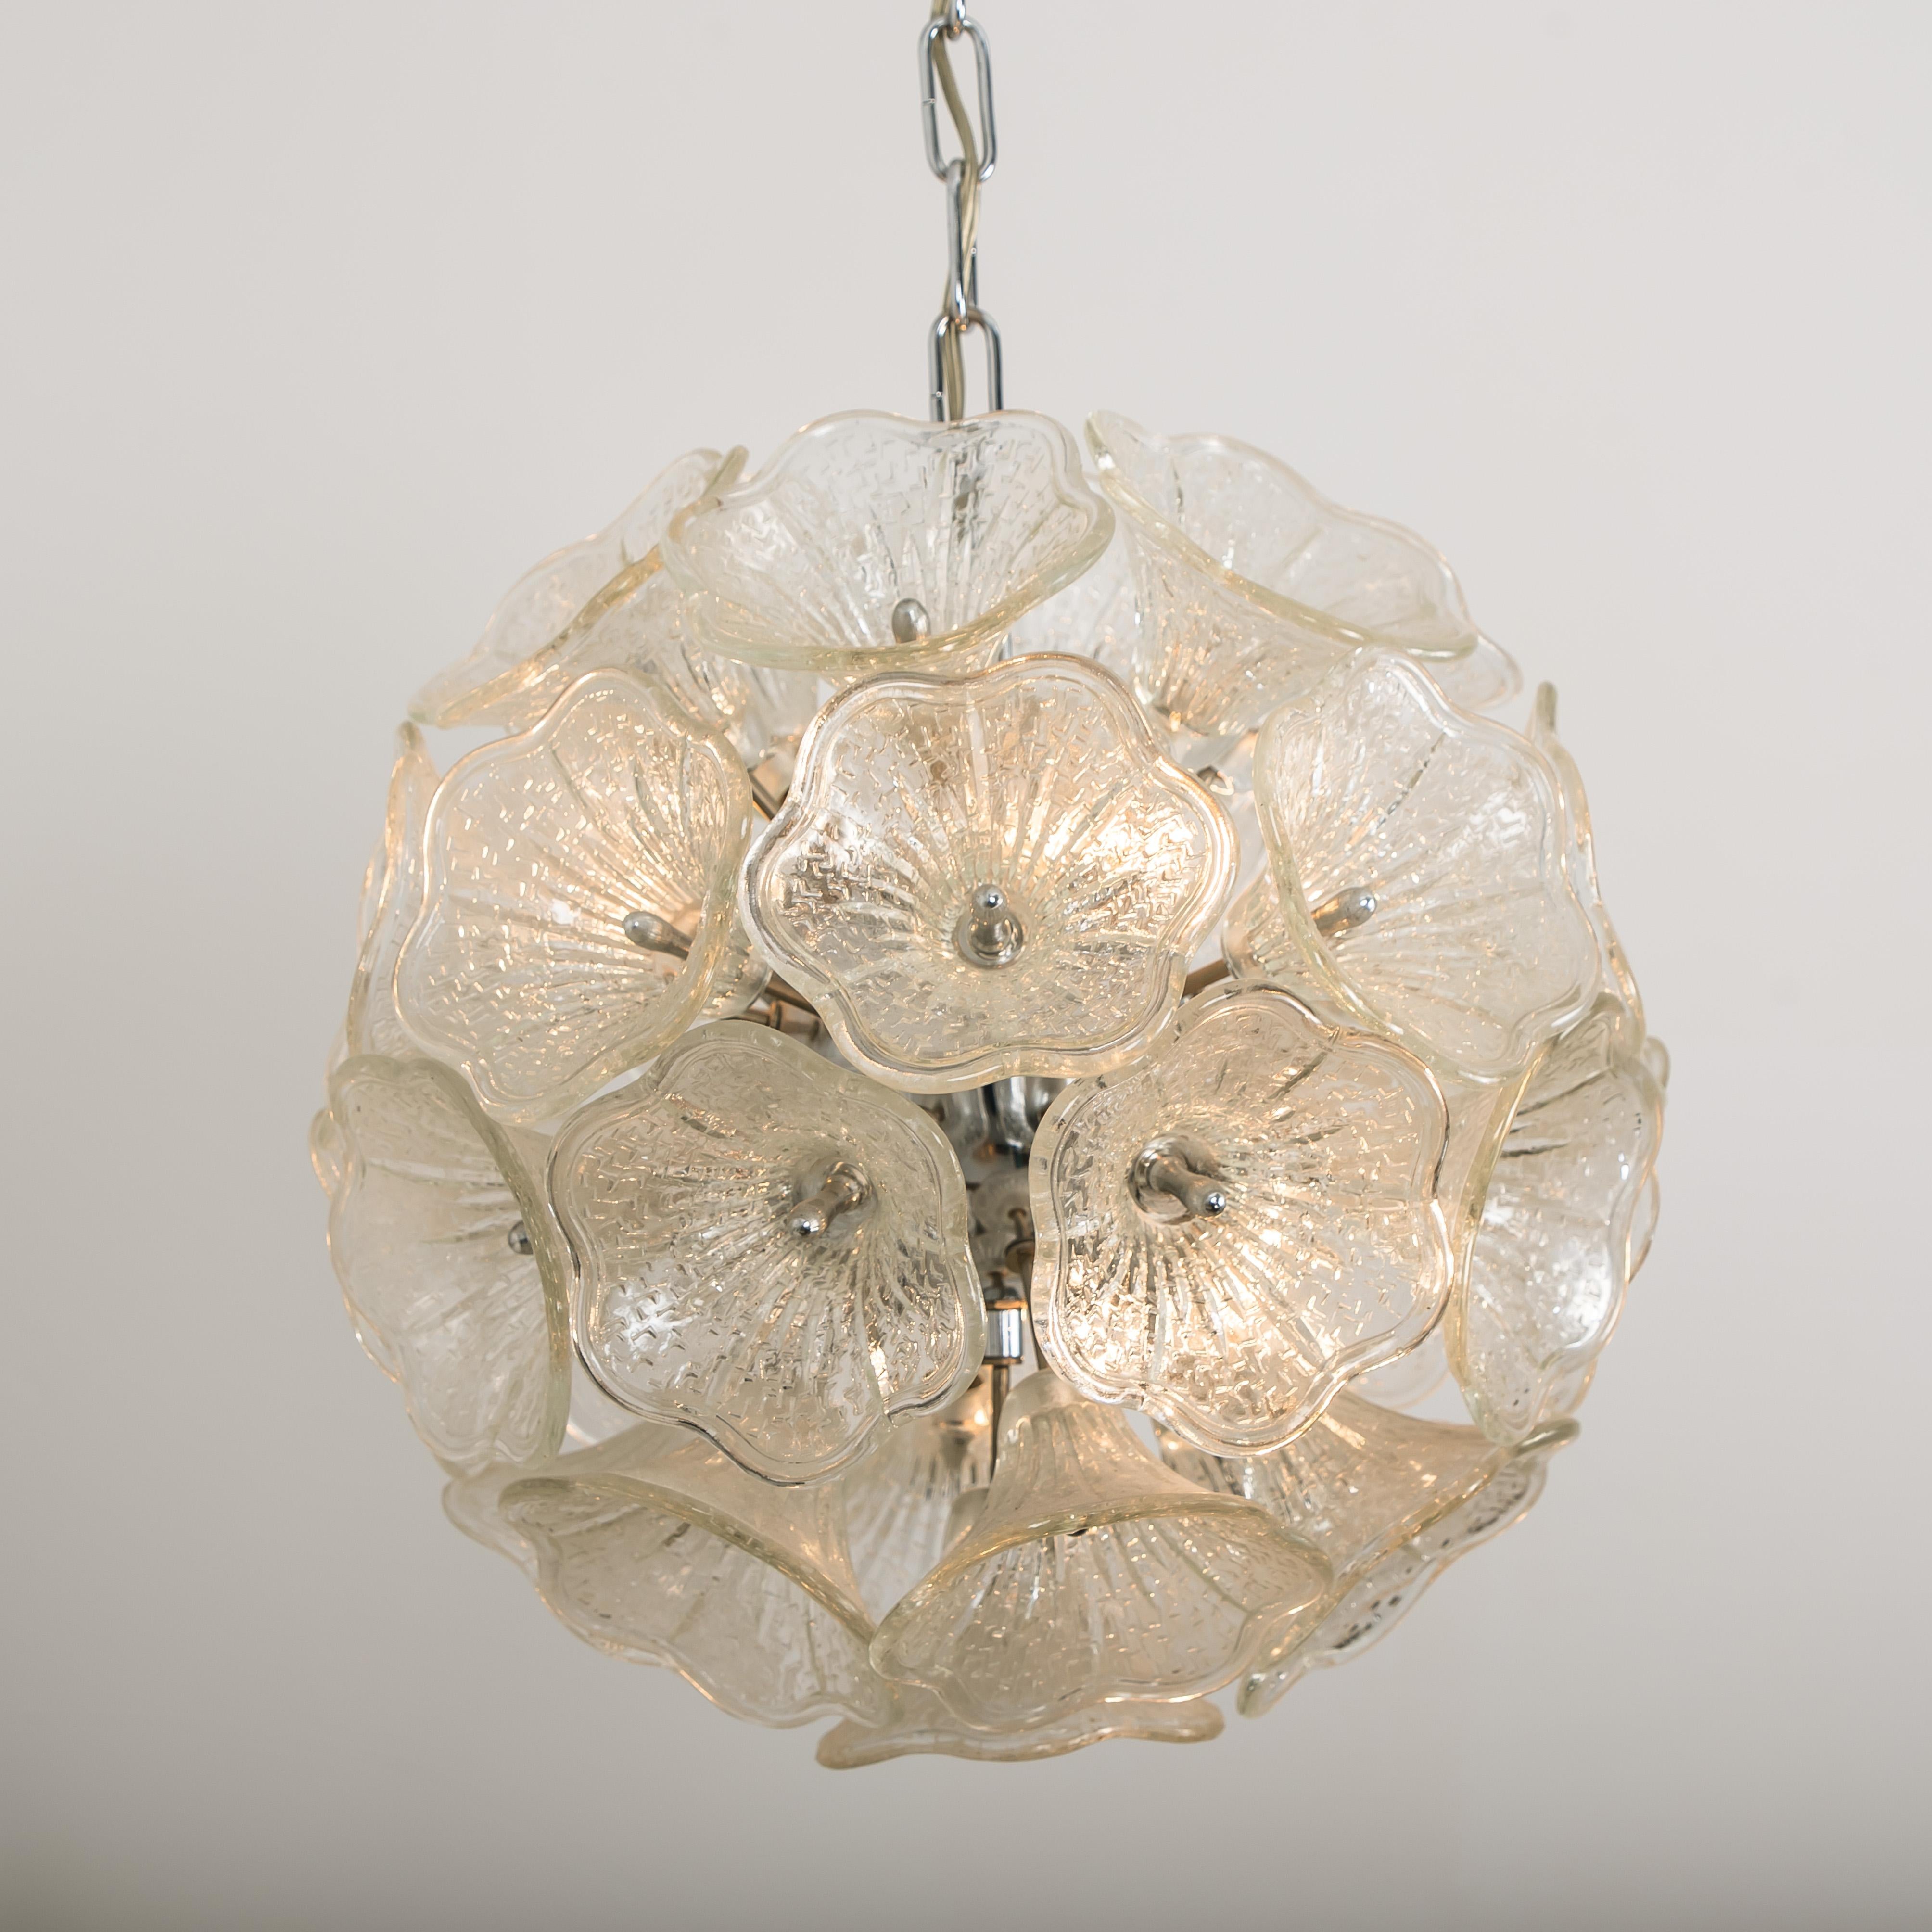 Gorgeous spherical Sputnik chandelier with 31 hand blown Murano glass flowers on a chrome structure.
Made in in the 1960s, in the style of Venini.

Checked and cleaned, in original excellent working and vintage condition. The rods can be adjusted